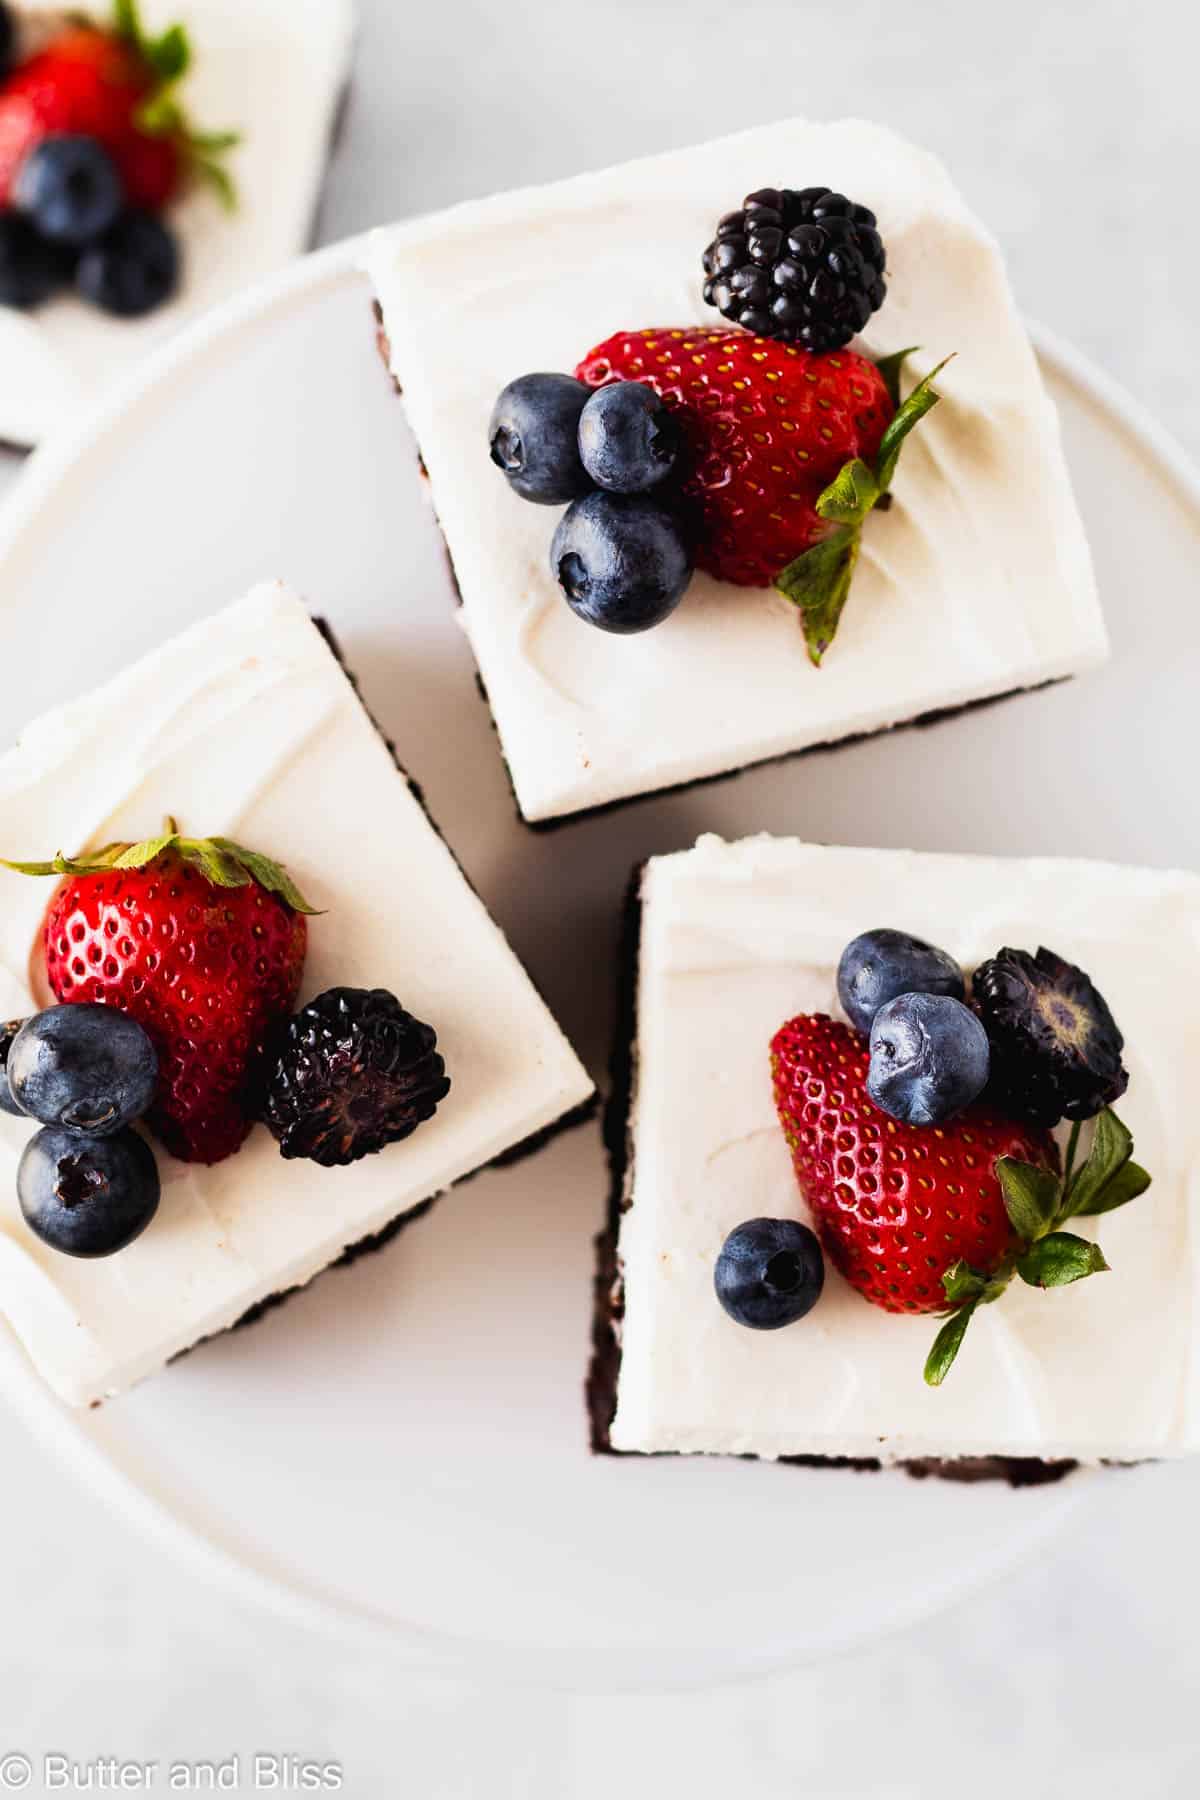 A tray of brownies with whipped topping with fresh fruit garnish.